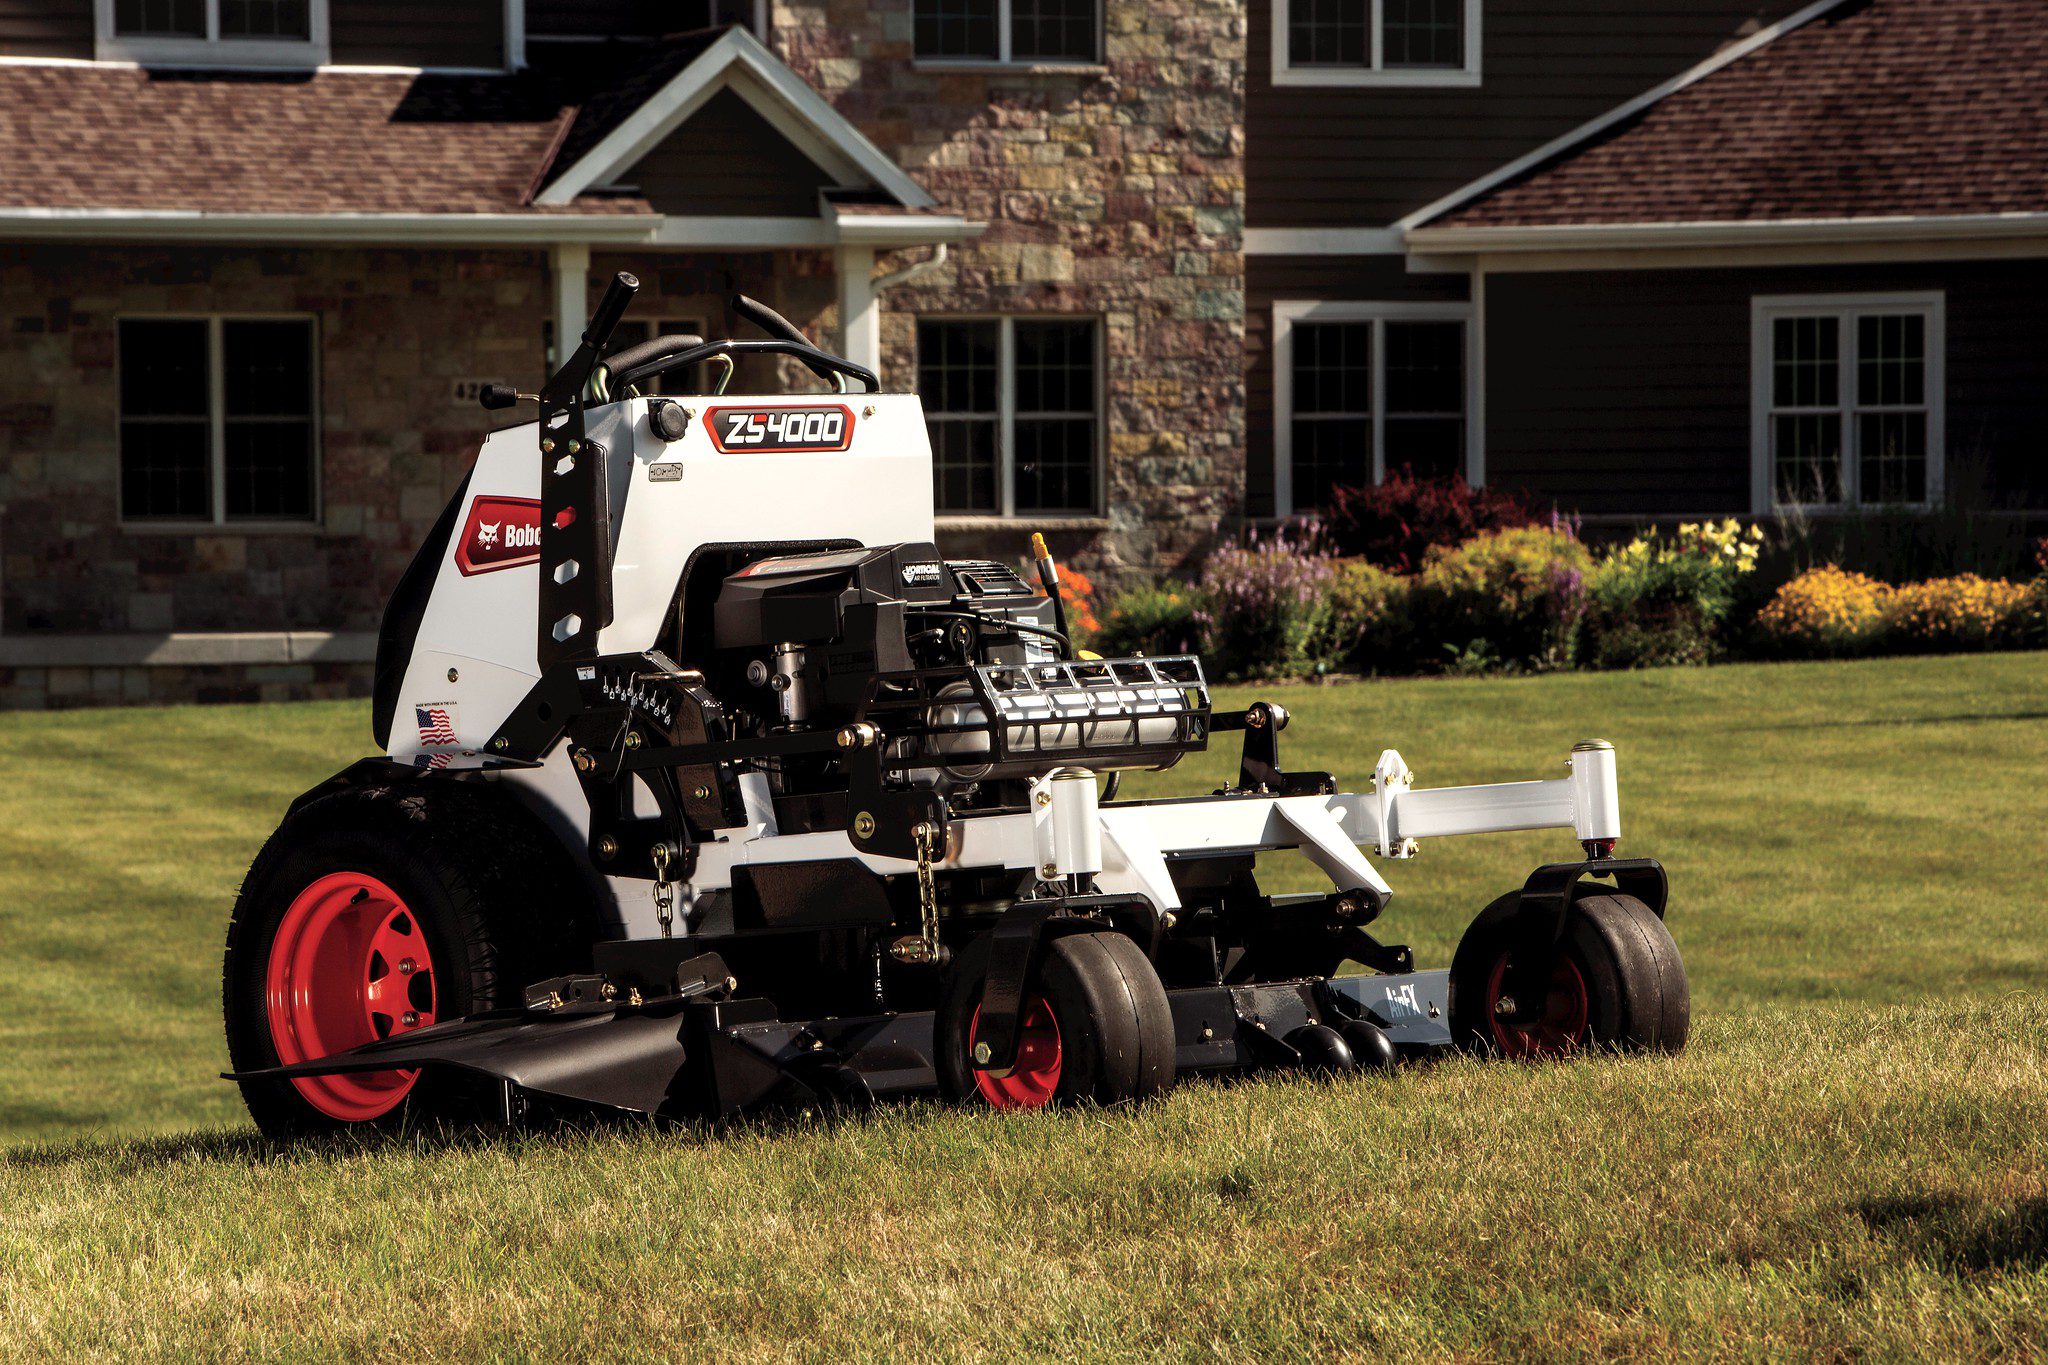 Browse Specs and more for the Bobcat ZS4000 Stand-On Mower 36″ - KC Bobcat